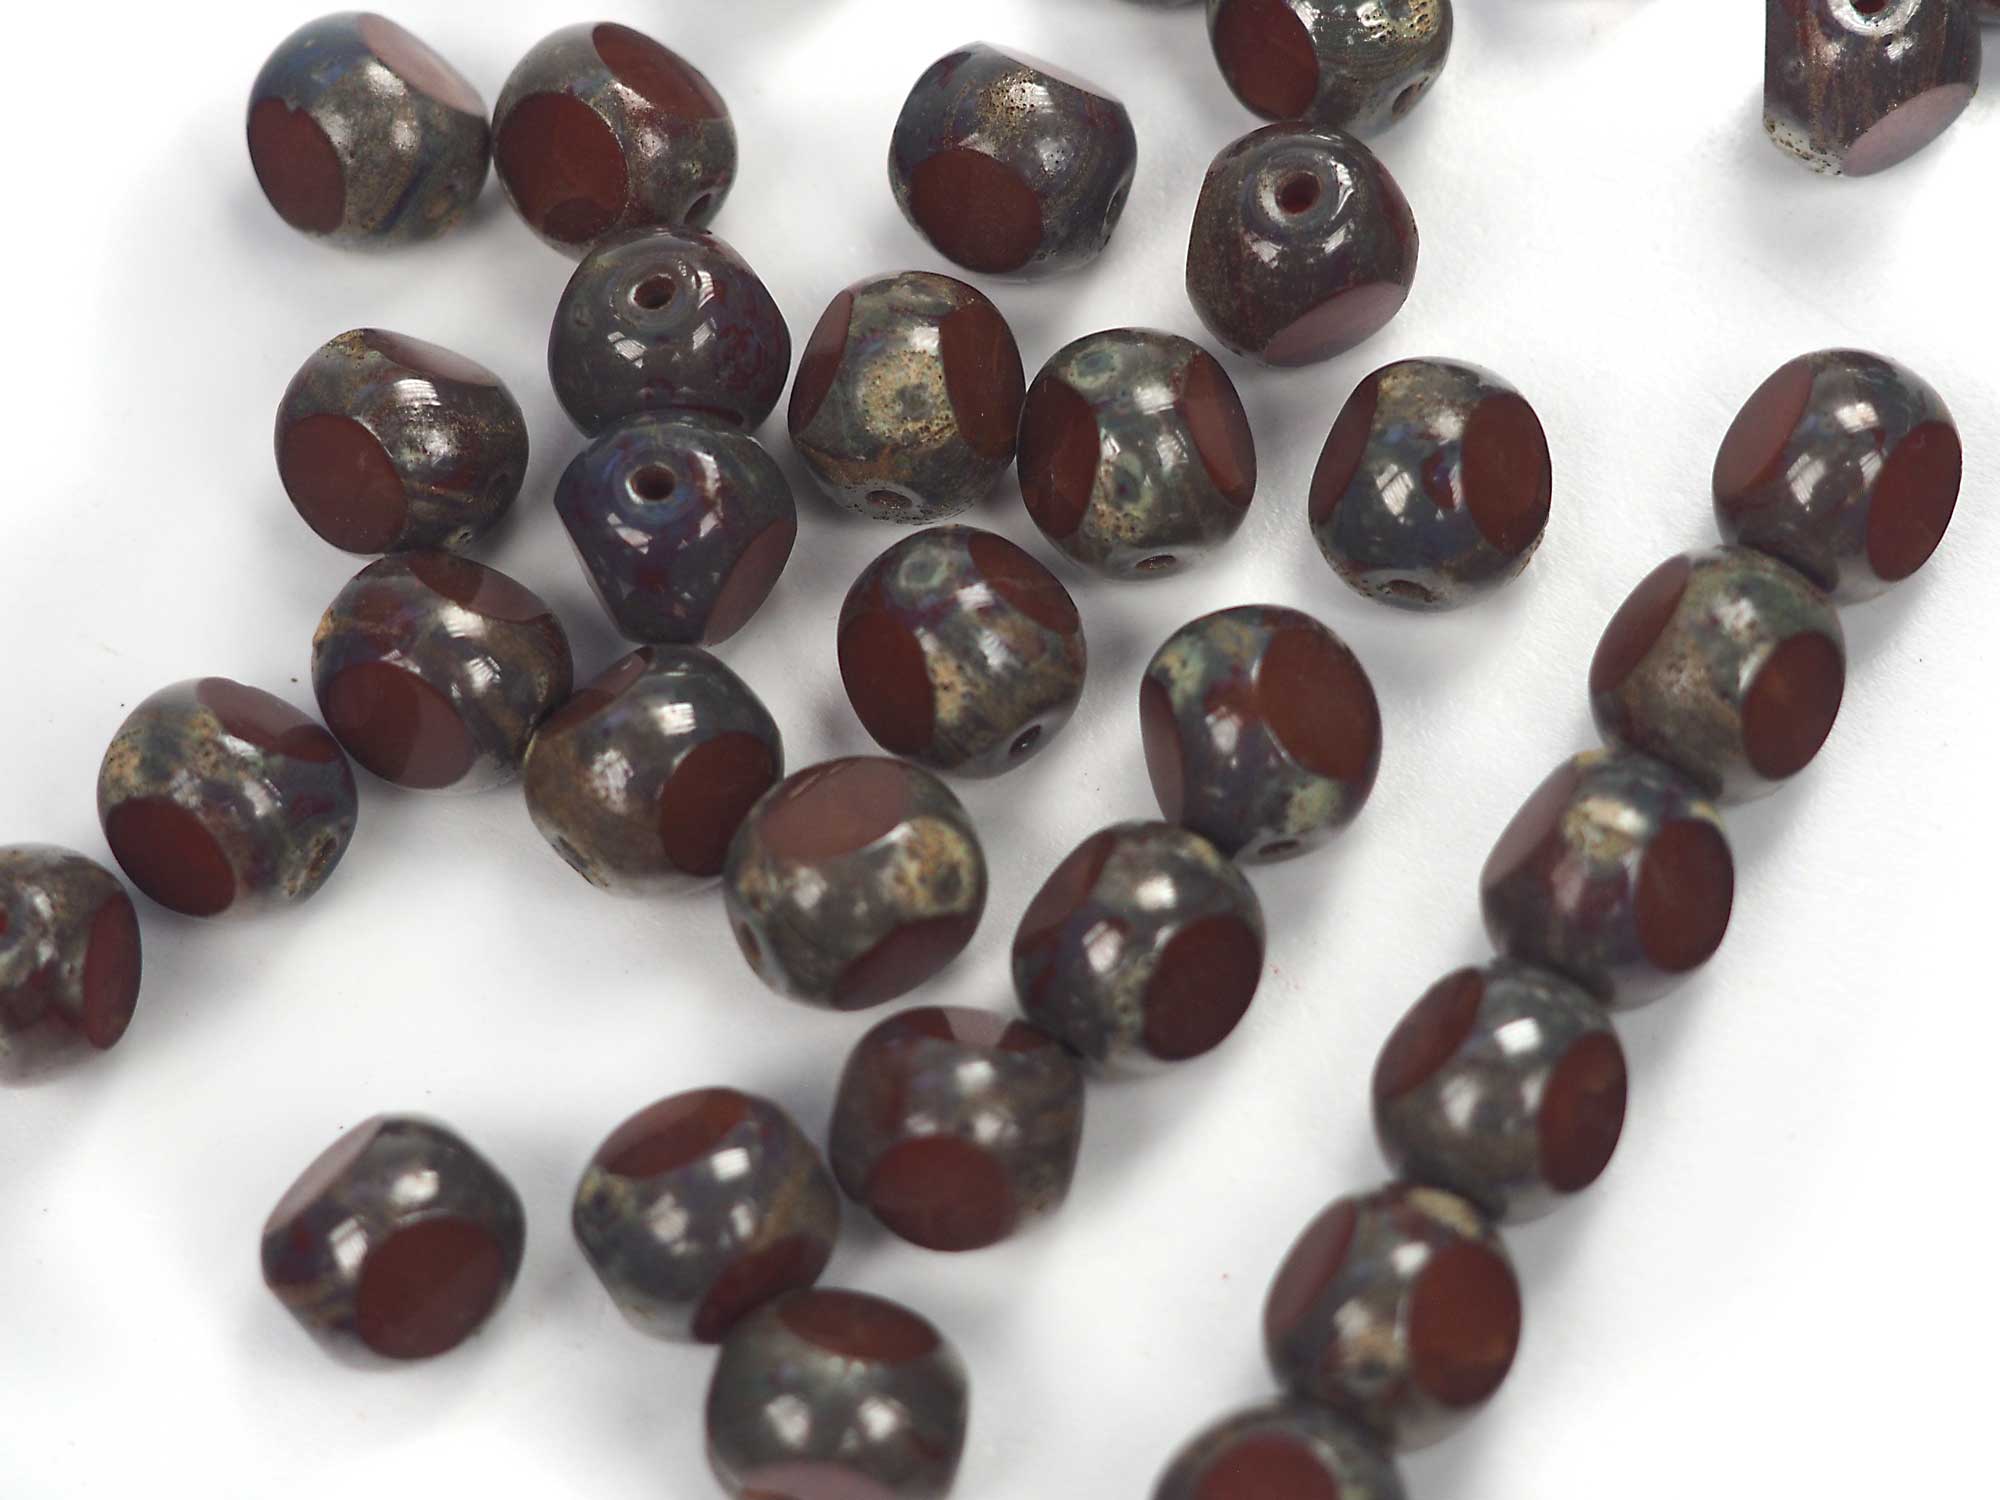 Czech Glass 3-Cut Round Window Beads (Soccer Ball Bead) Art. 151-19501 in size 10mm, Opaque Dark Brown with Picasso coating, 24pcs, P880